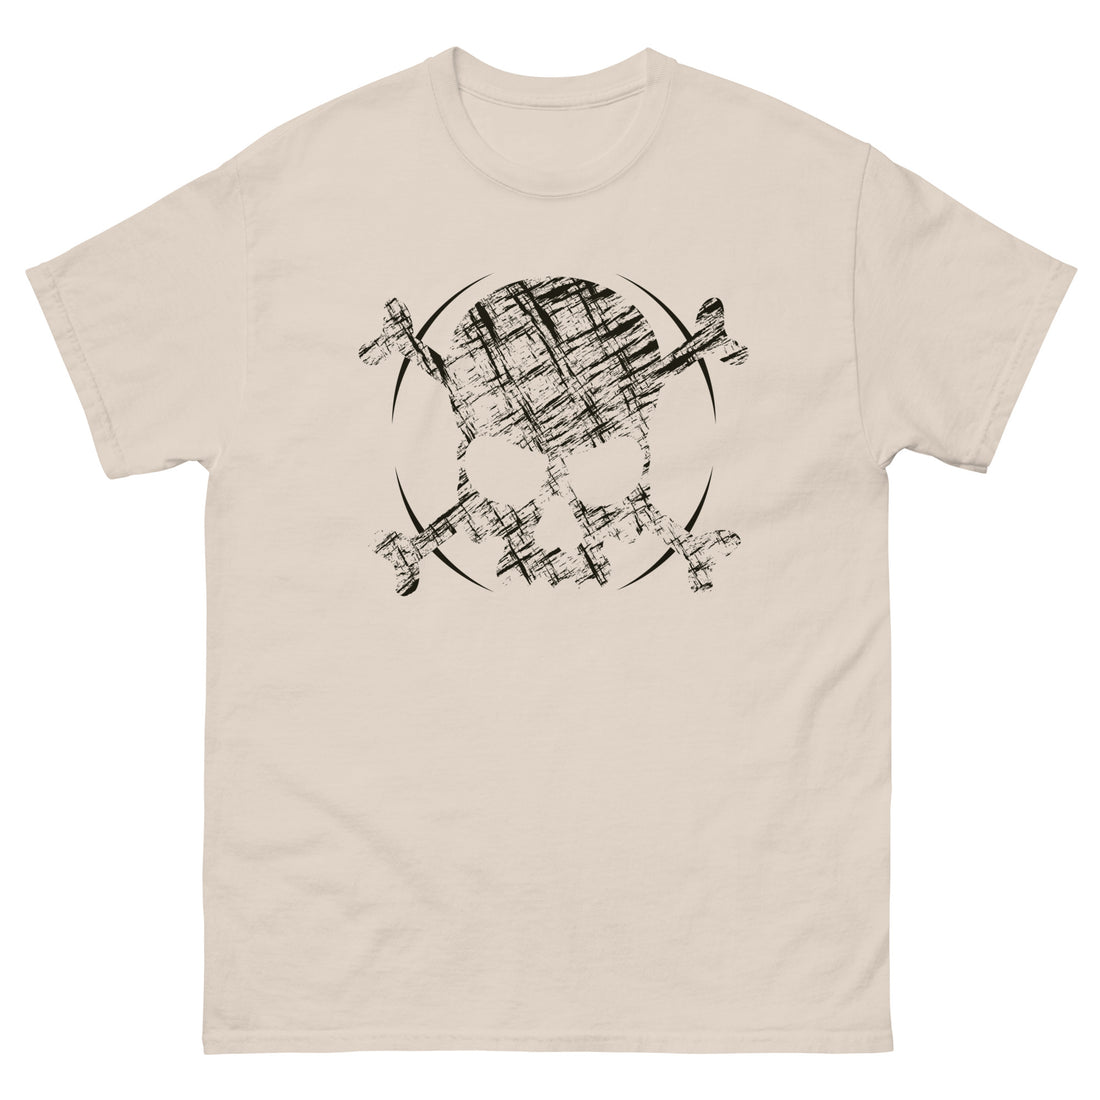 A beige t-shirt adorned with a roughly cross-hatched skull and crossbones in black.  Solid black arcs give the image the impression of movement towards the end of the crossbones.